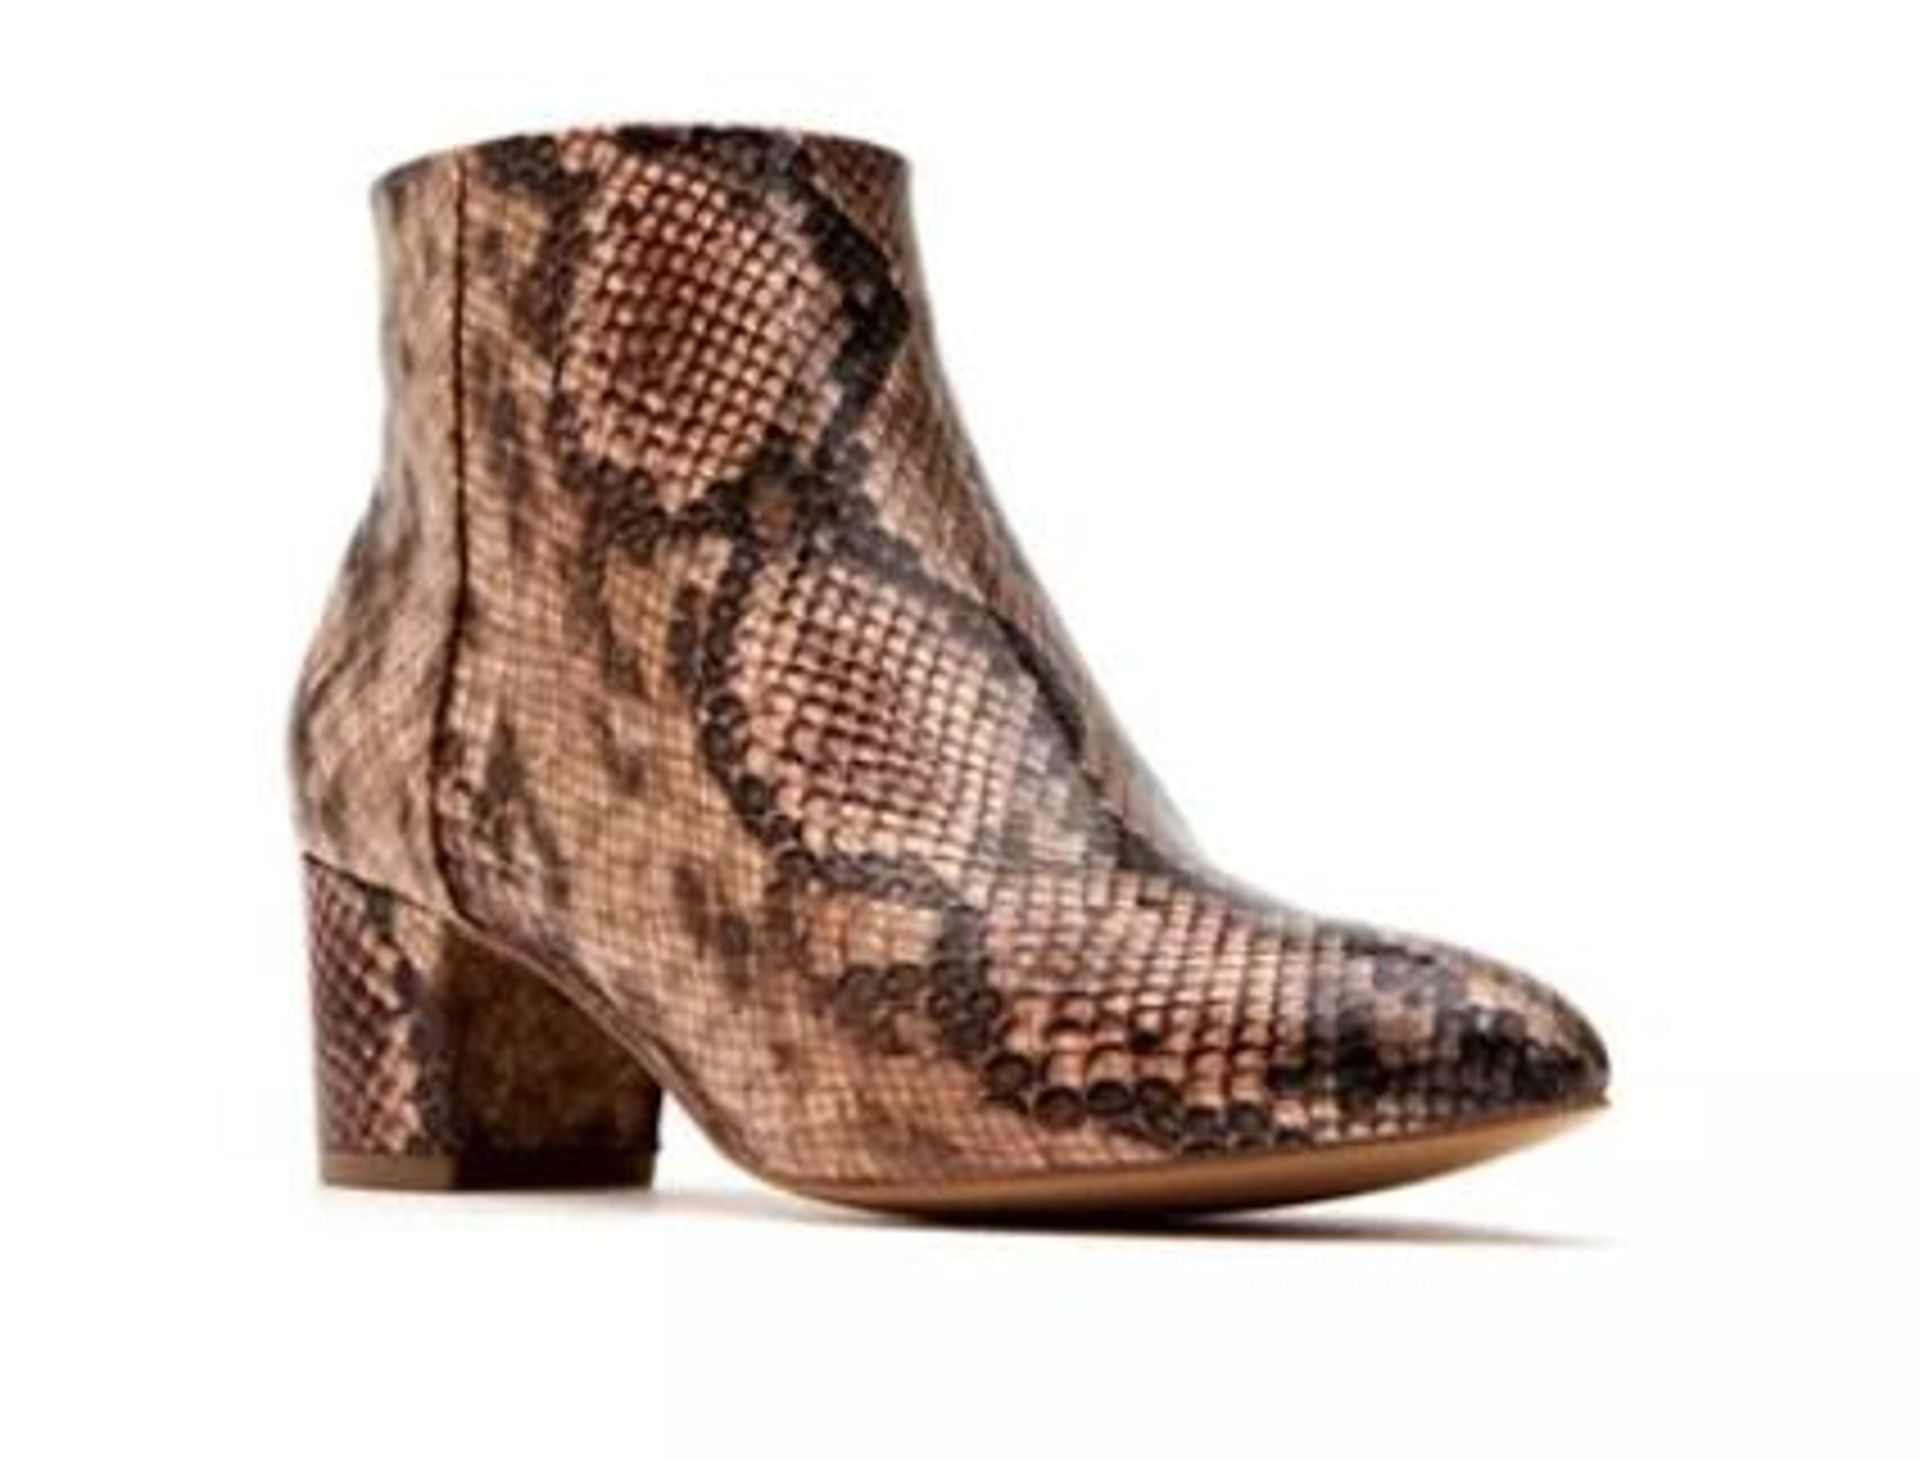 macy's katy perry boots